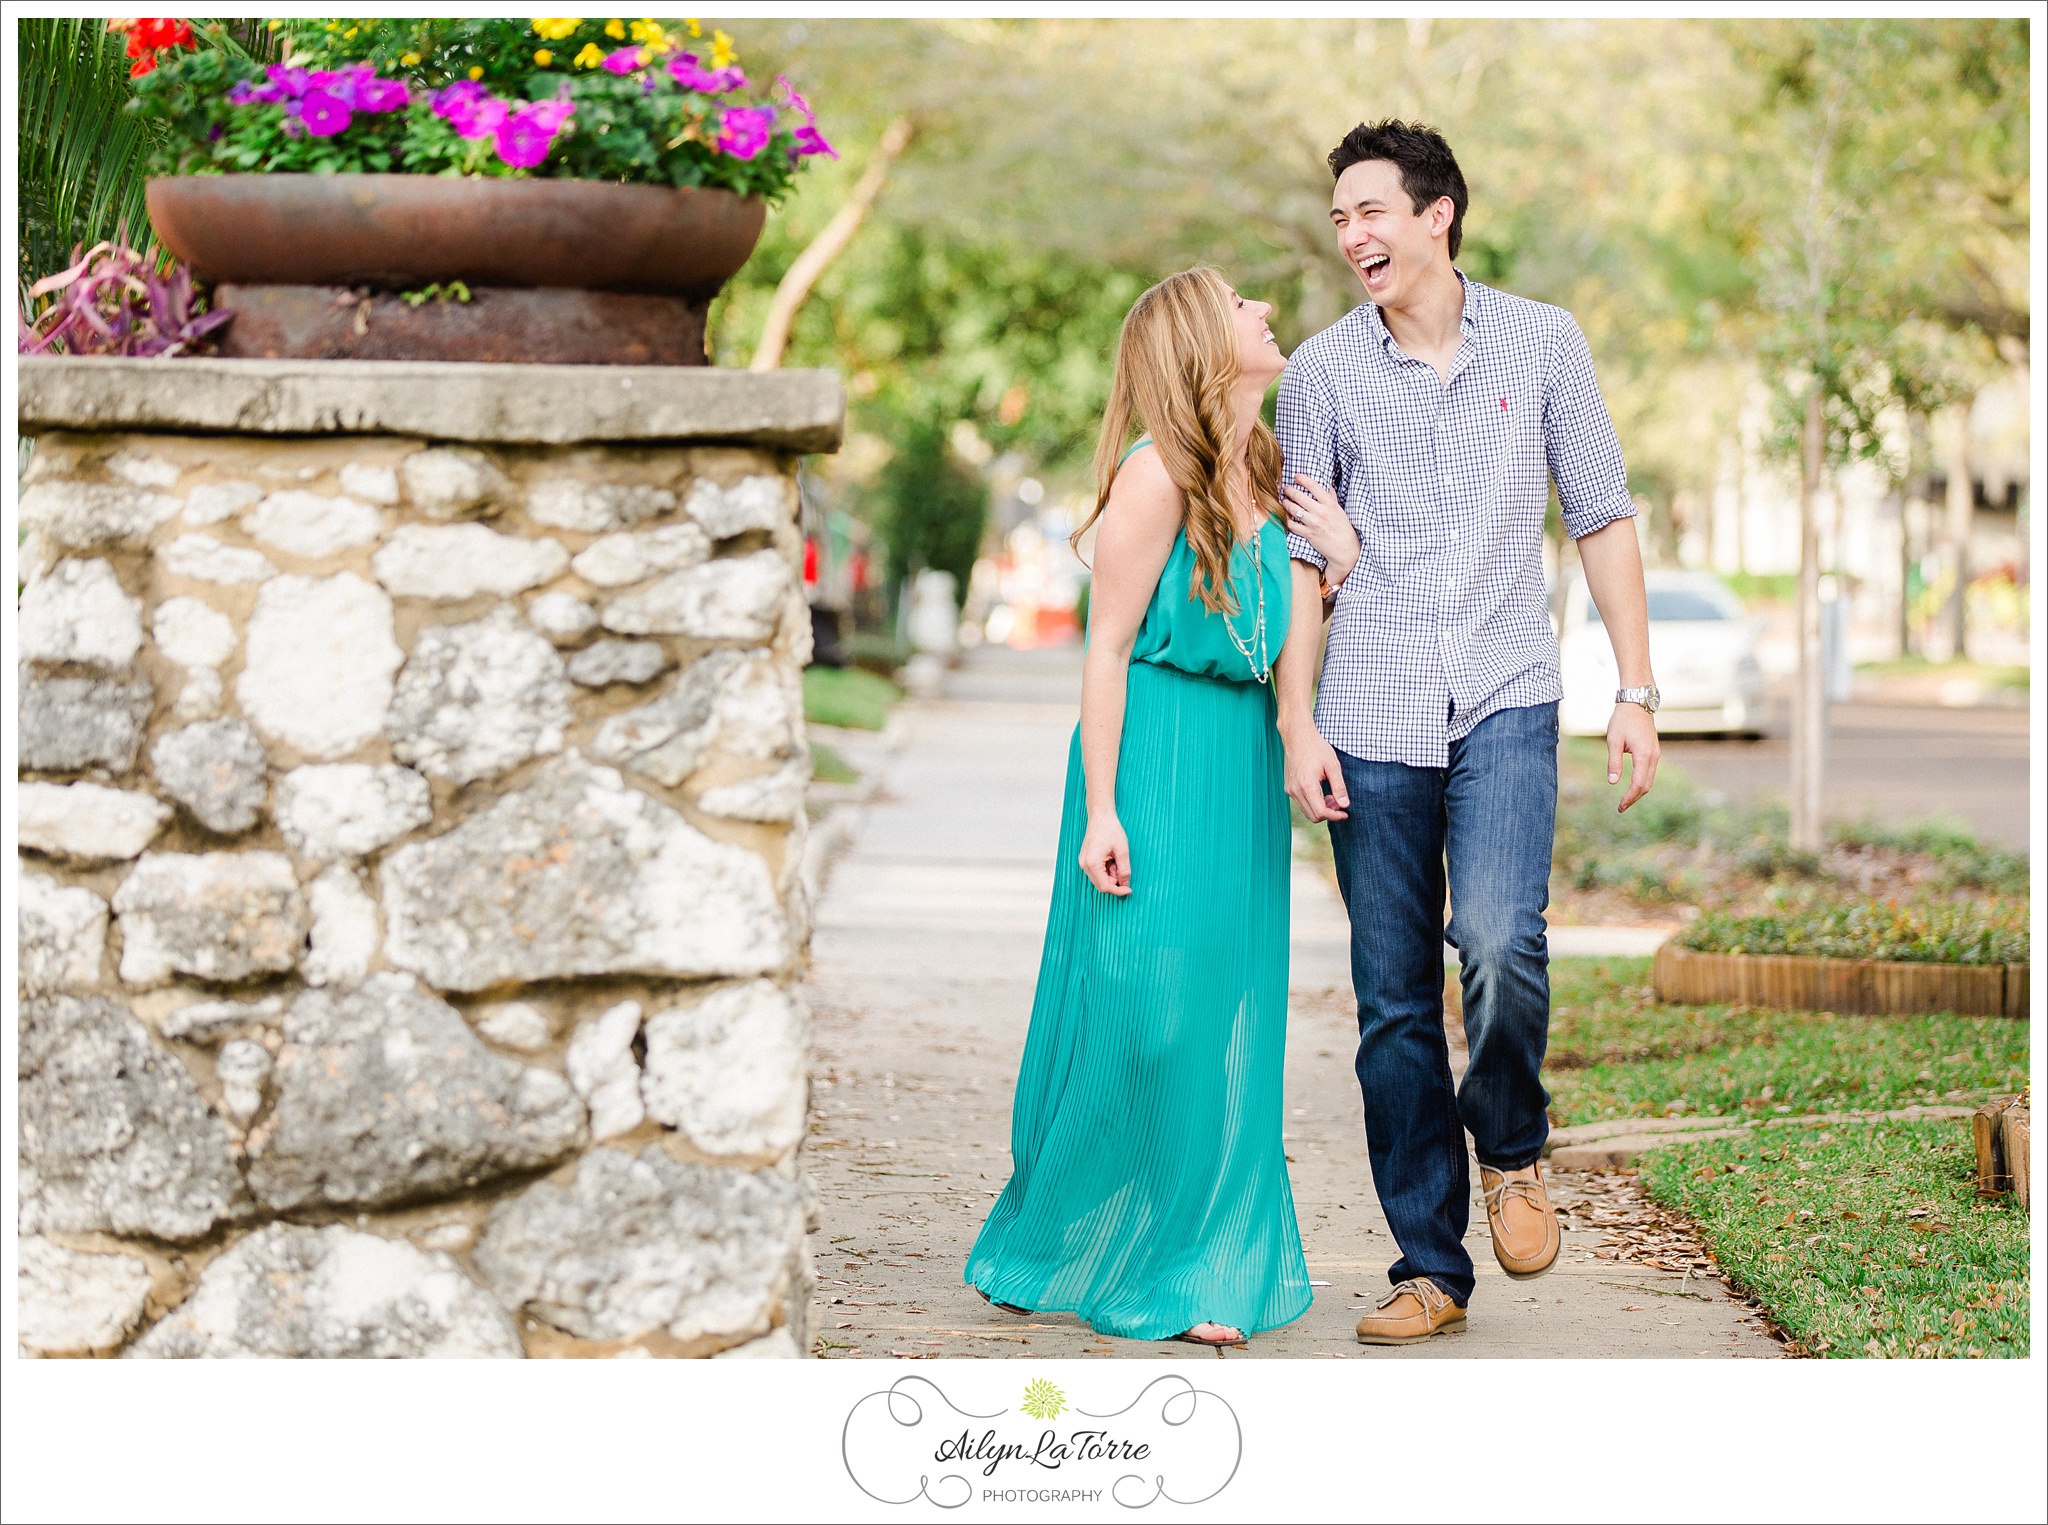 South Tampa Engagement | © Ailyn La Torre Photography 2015